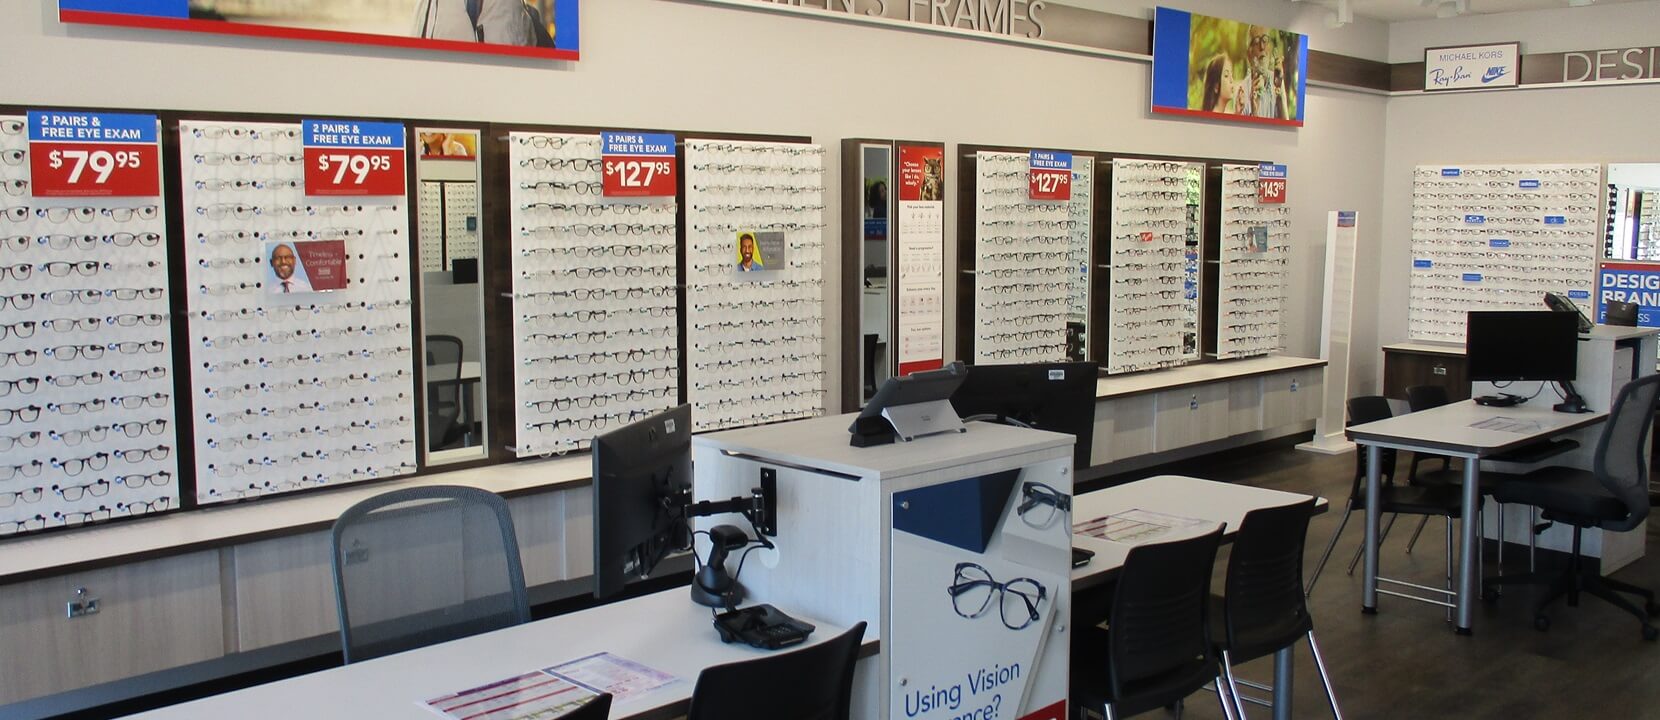 Installation of glasses displays on wall with graphics and signage and installation of new desks and chairs